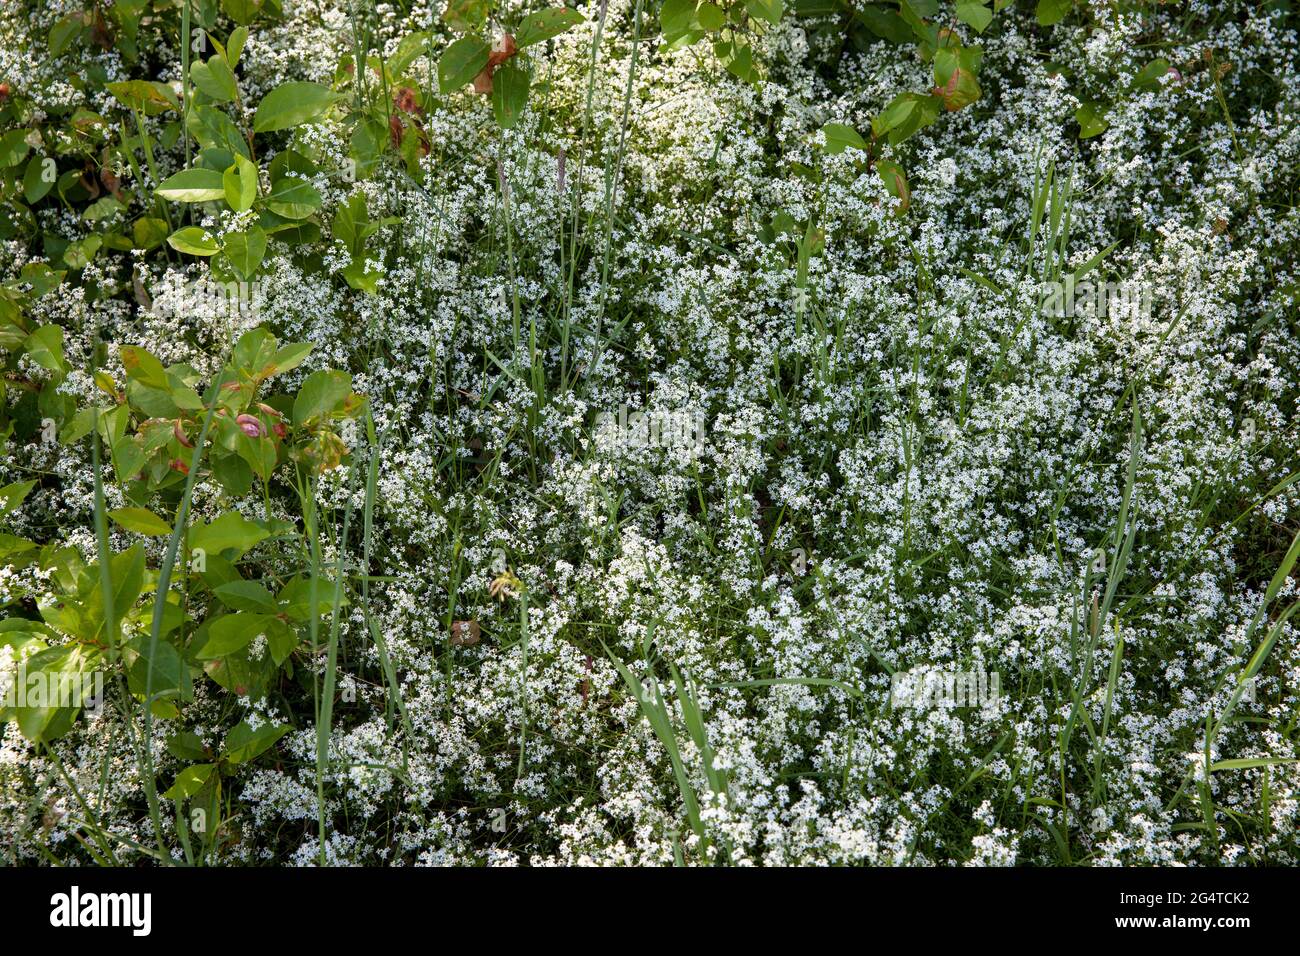 flowering bedstraw in the Pionierbecken 2 in the Koenigsforest near Cologne, North Rhine-Westphalia, Germany. The Pionierbecken (pioneer ponds) are fo Stock Photo